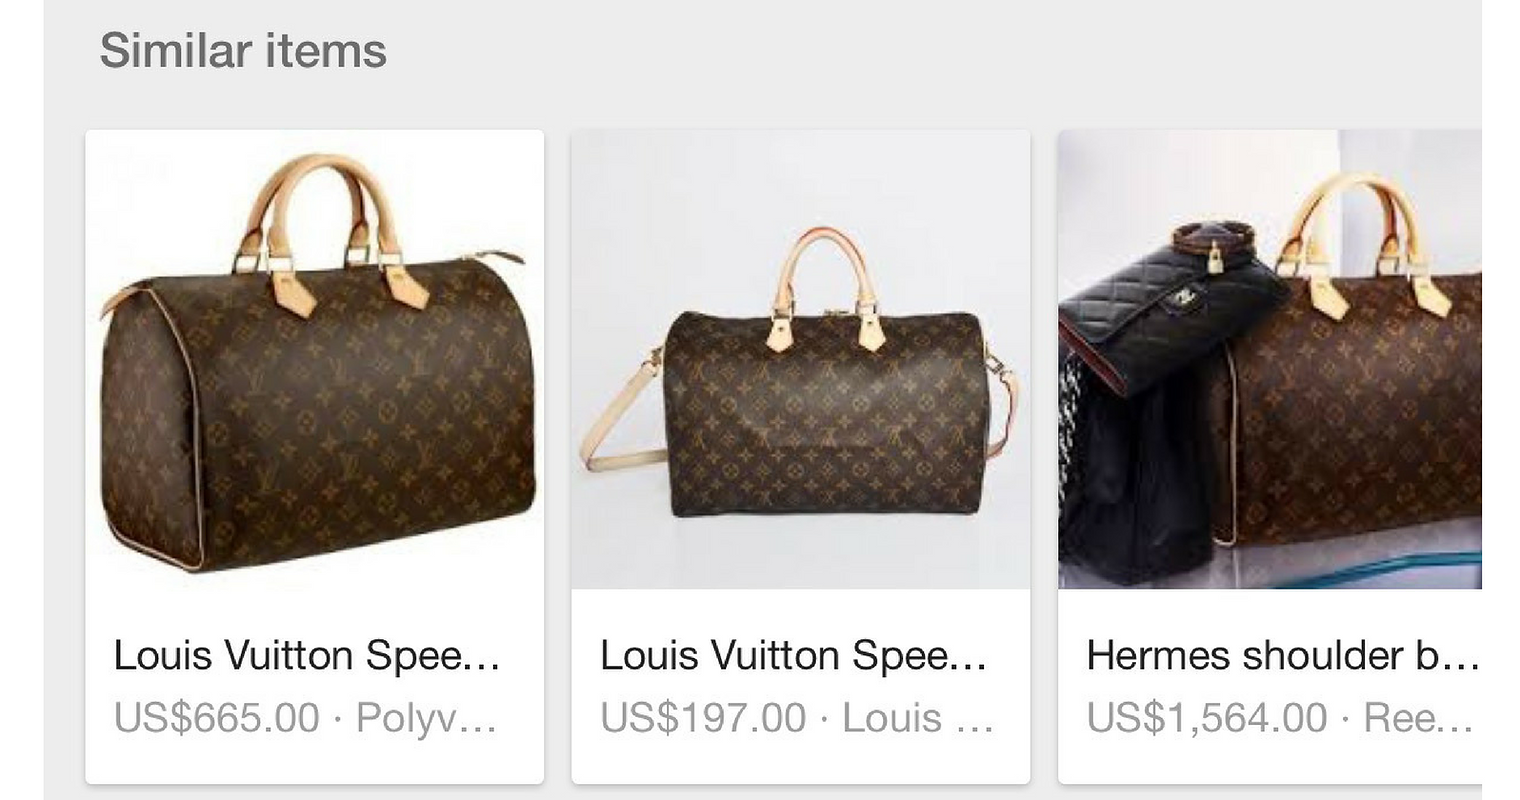 Google Image Search Introduces “Similar Items” Suggestions